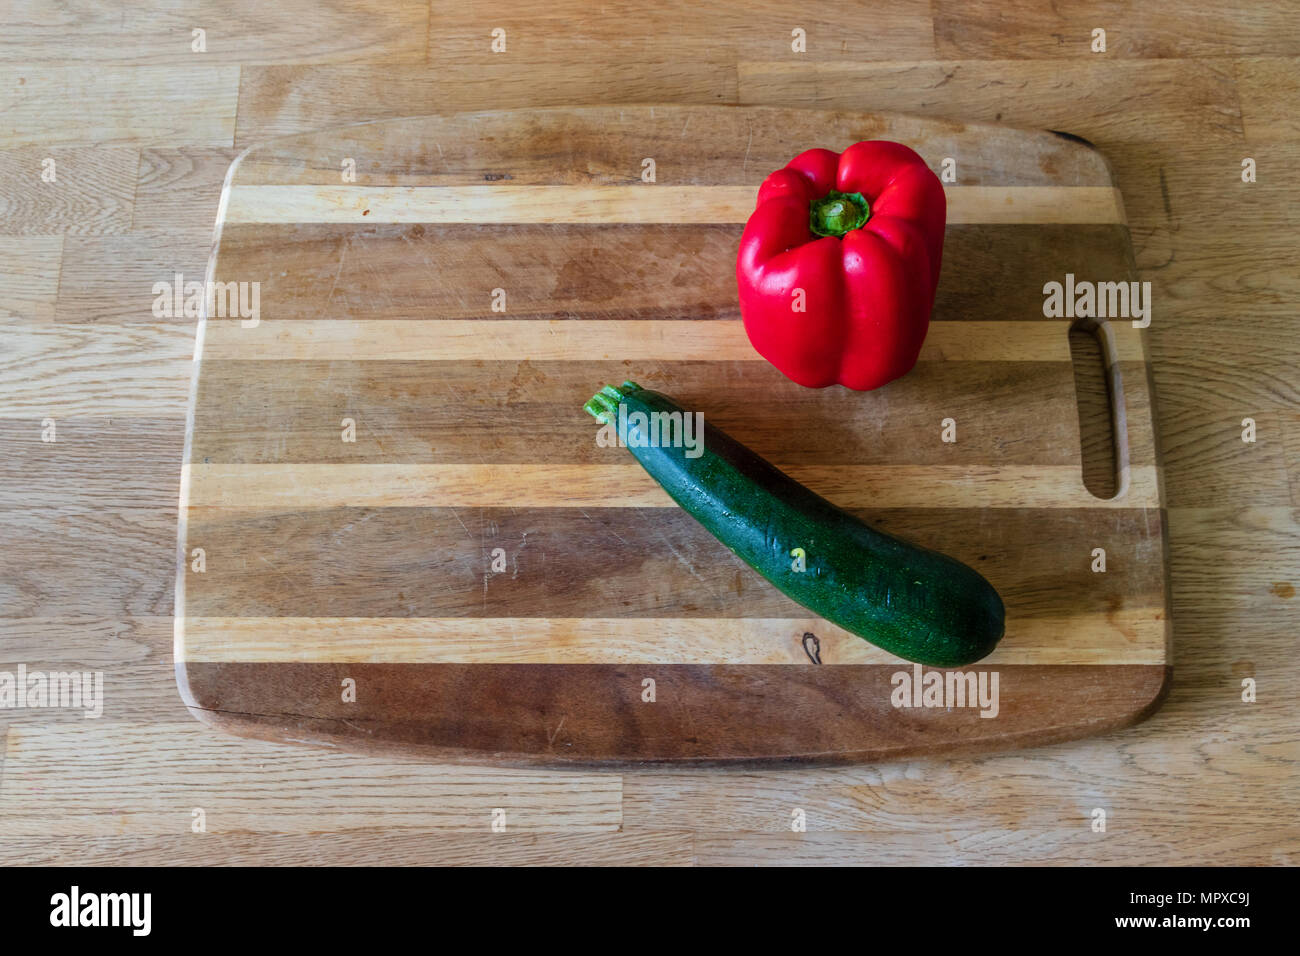 A red pepper and courgette on a chopping board Stock Photo